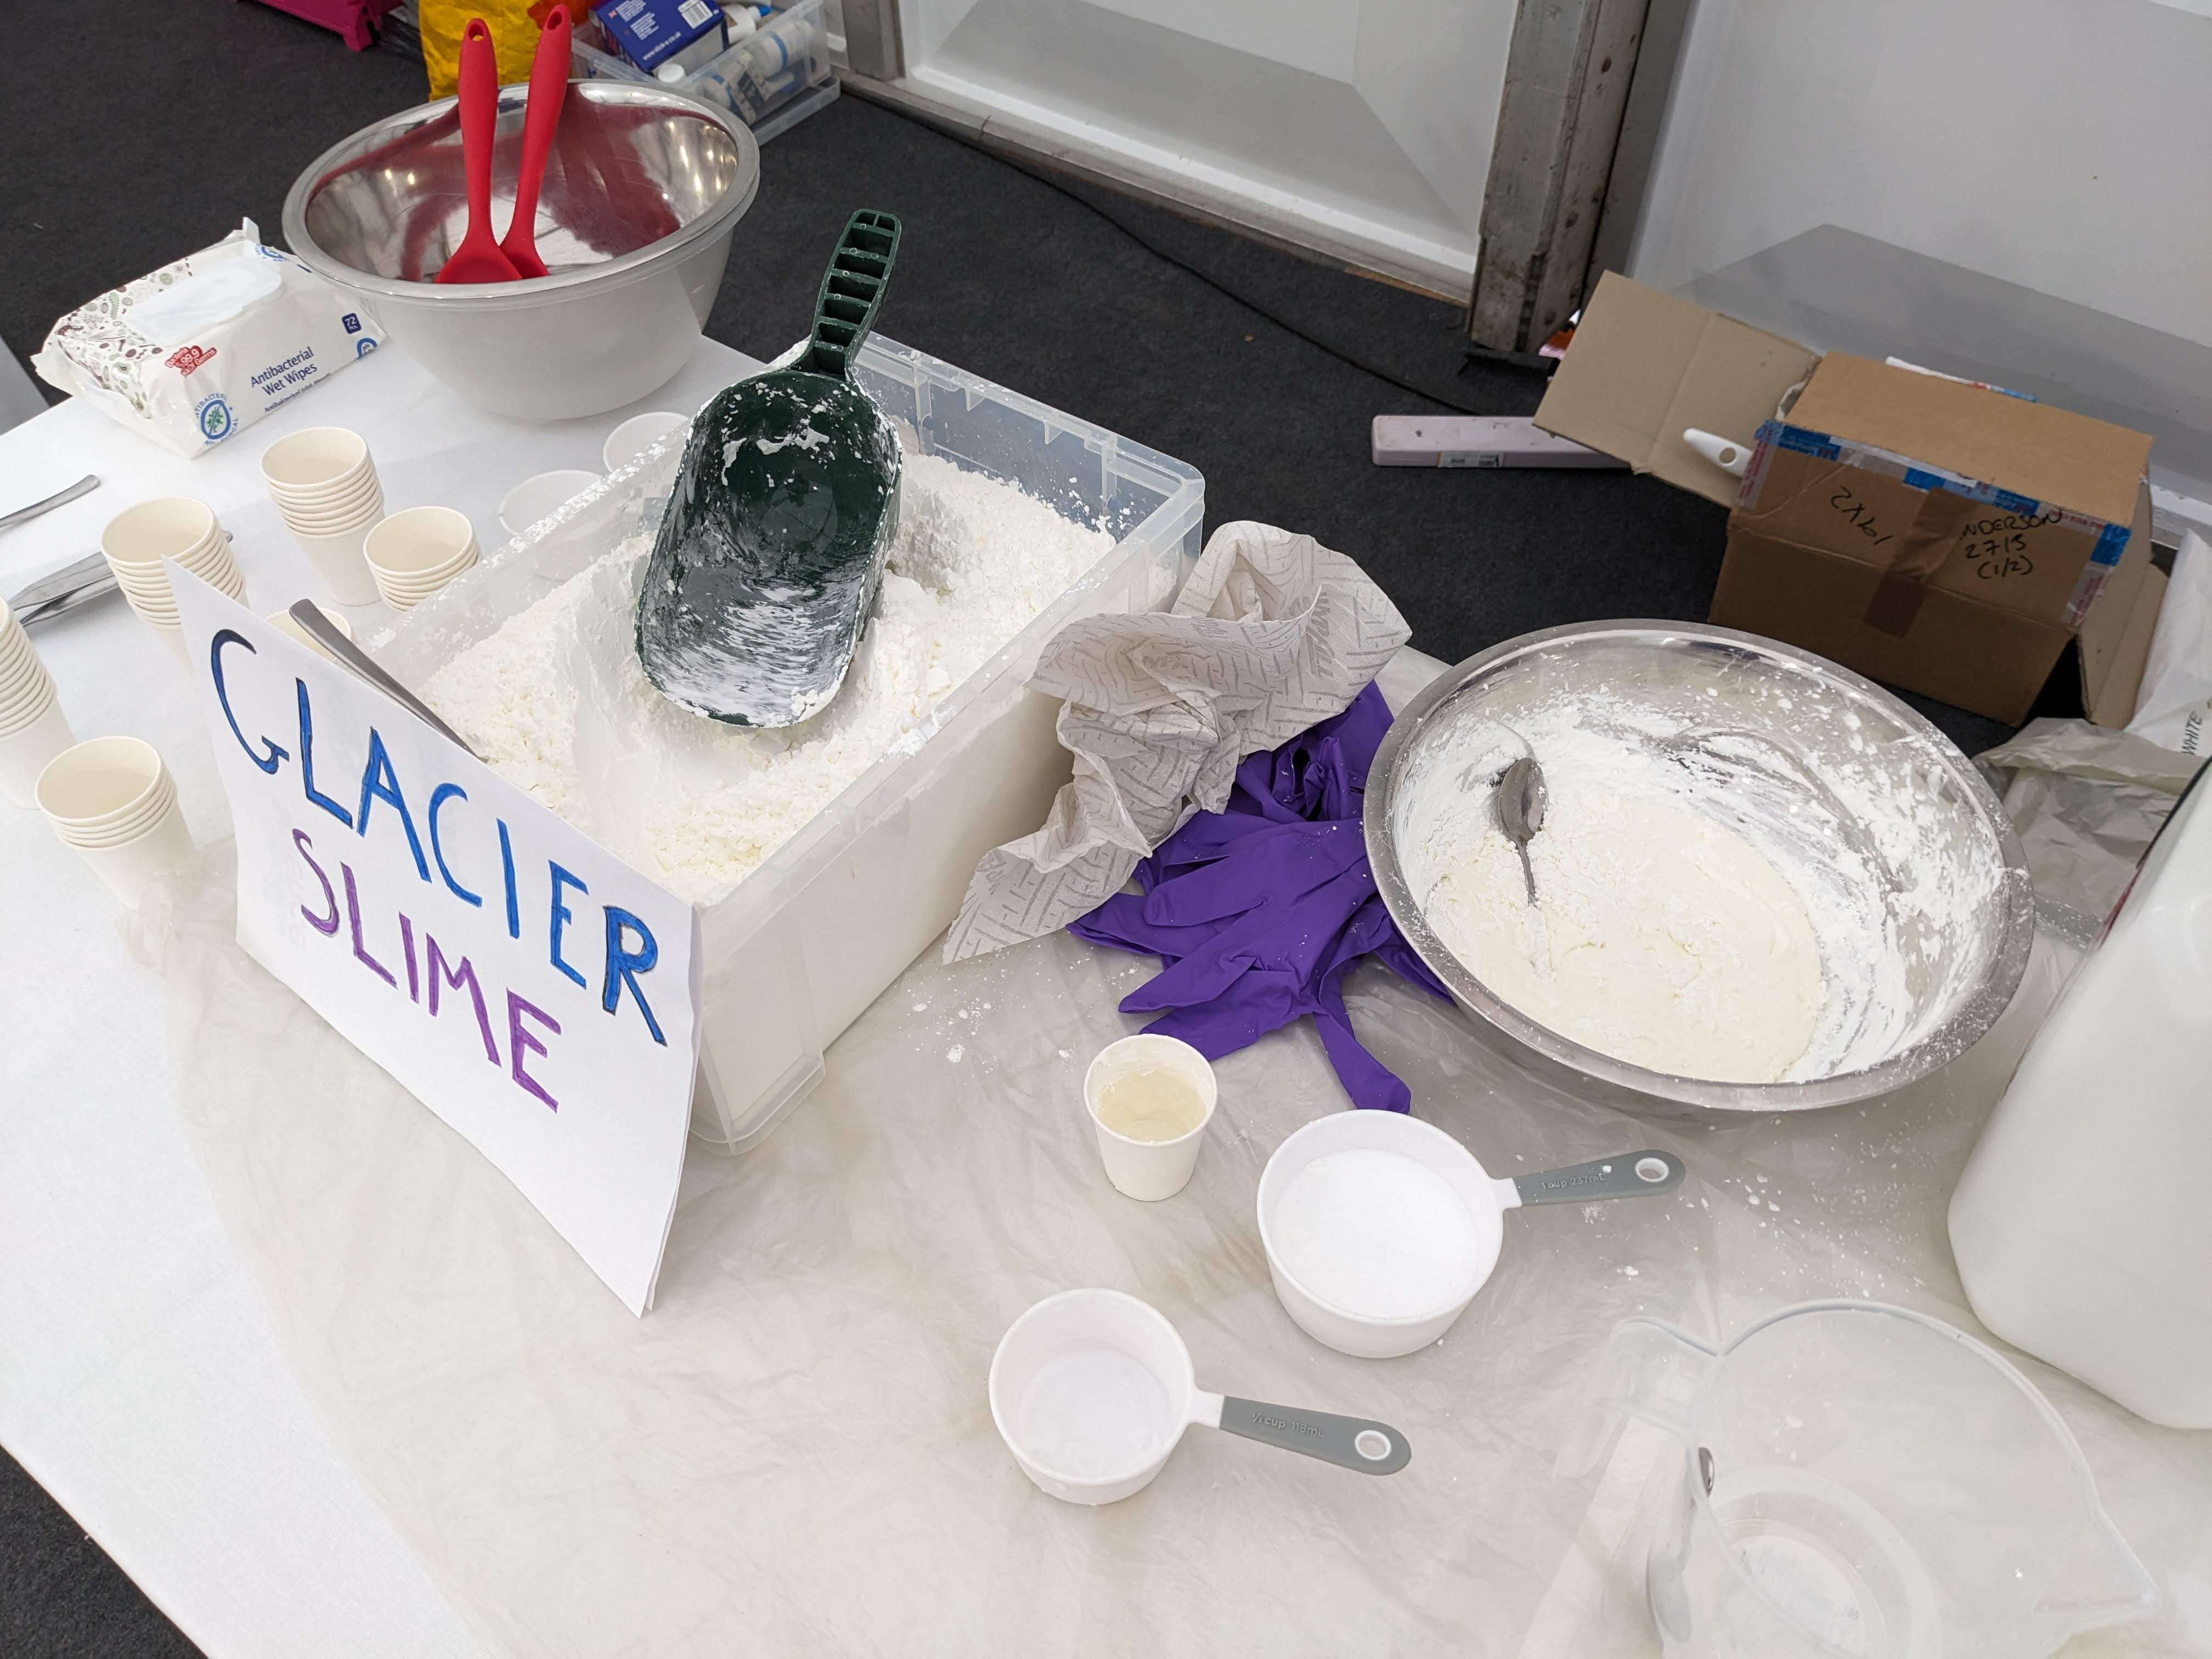 Ingredients on a table, including white powder, measuring cups, bowls and a sign that says Glacier Slime. 